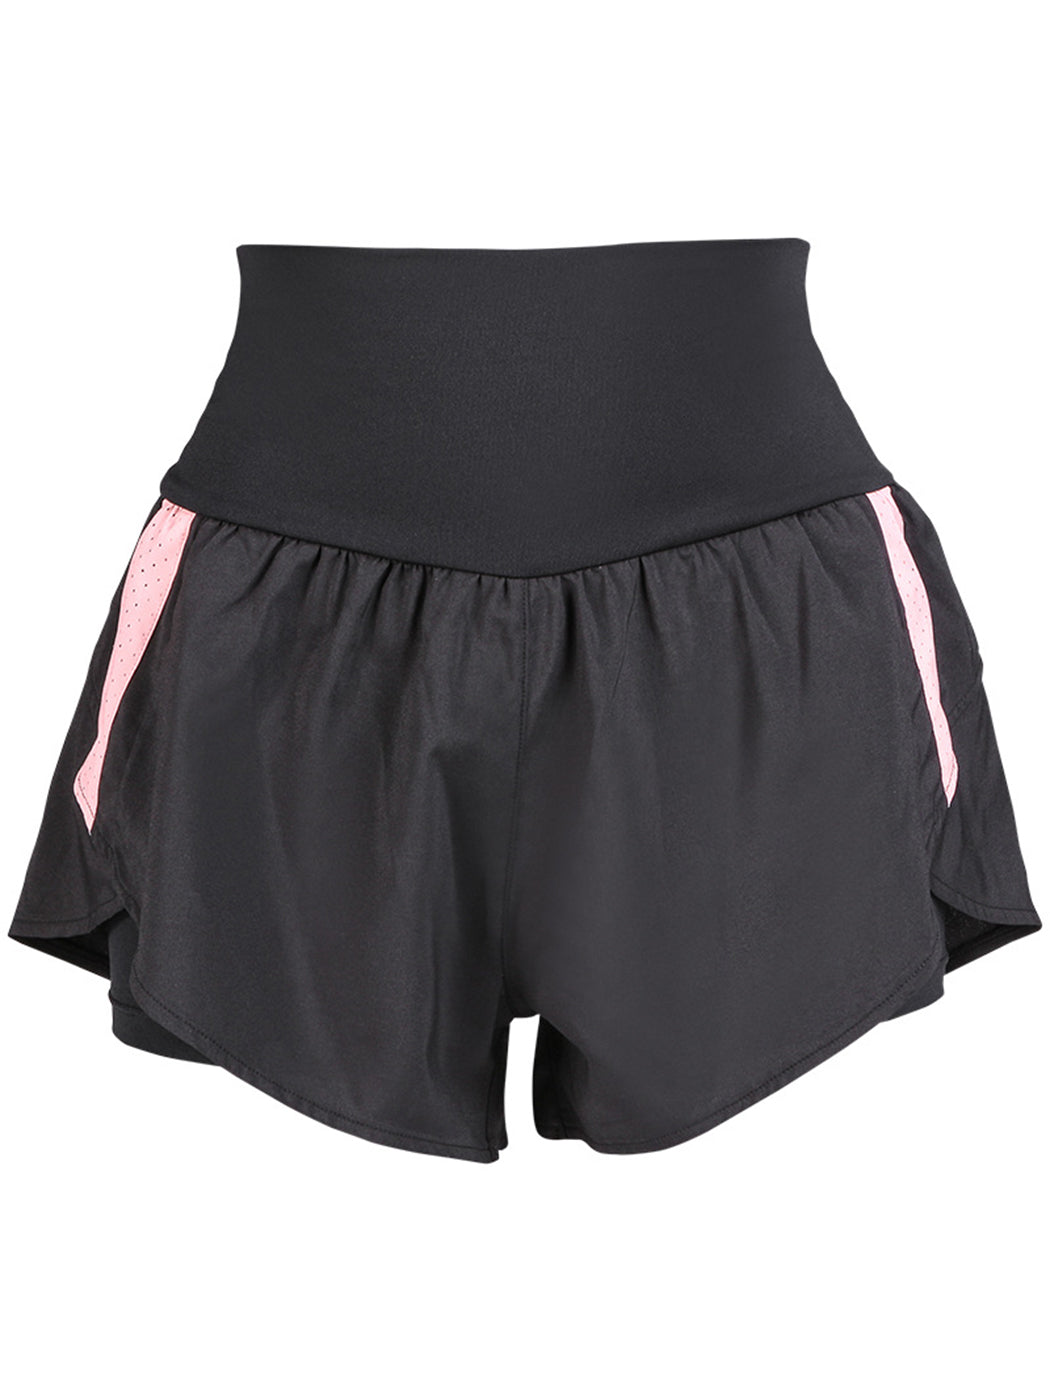 Running Yoga Shorts Double Layer Quick Dry Gym Athletic Shorts